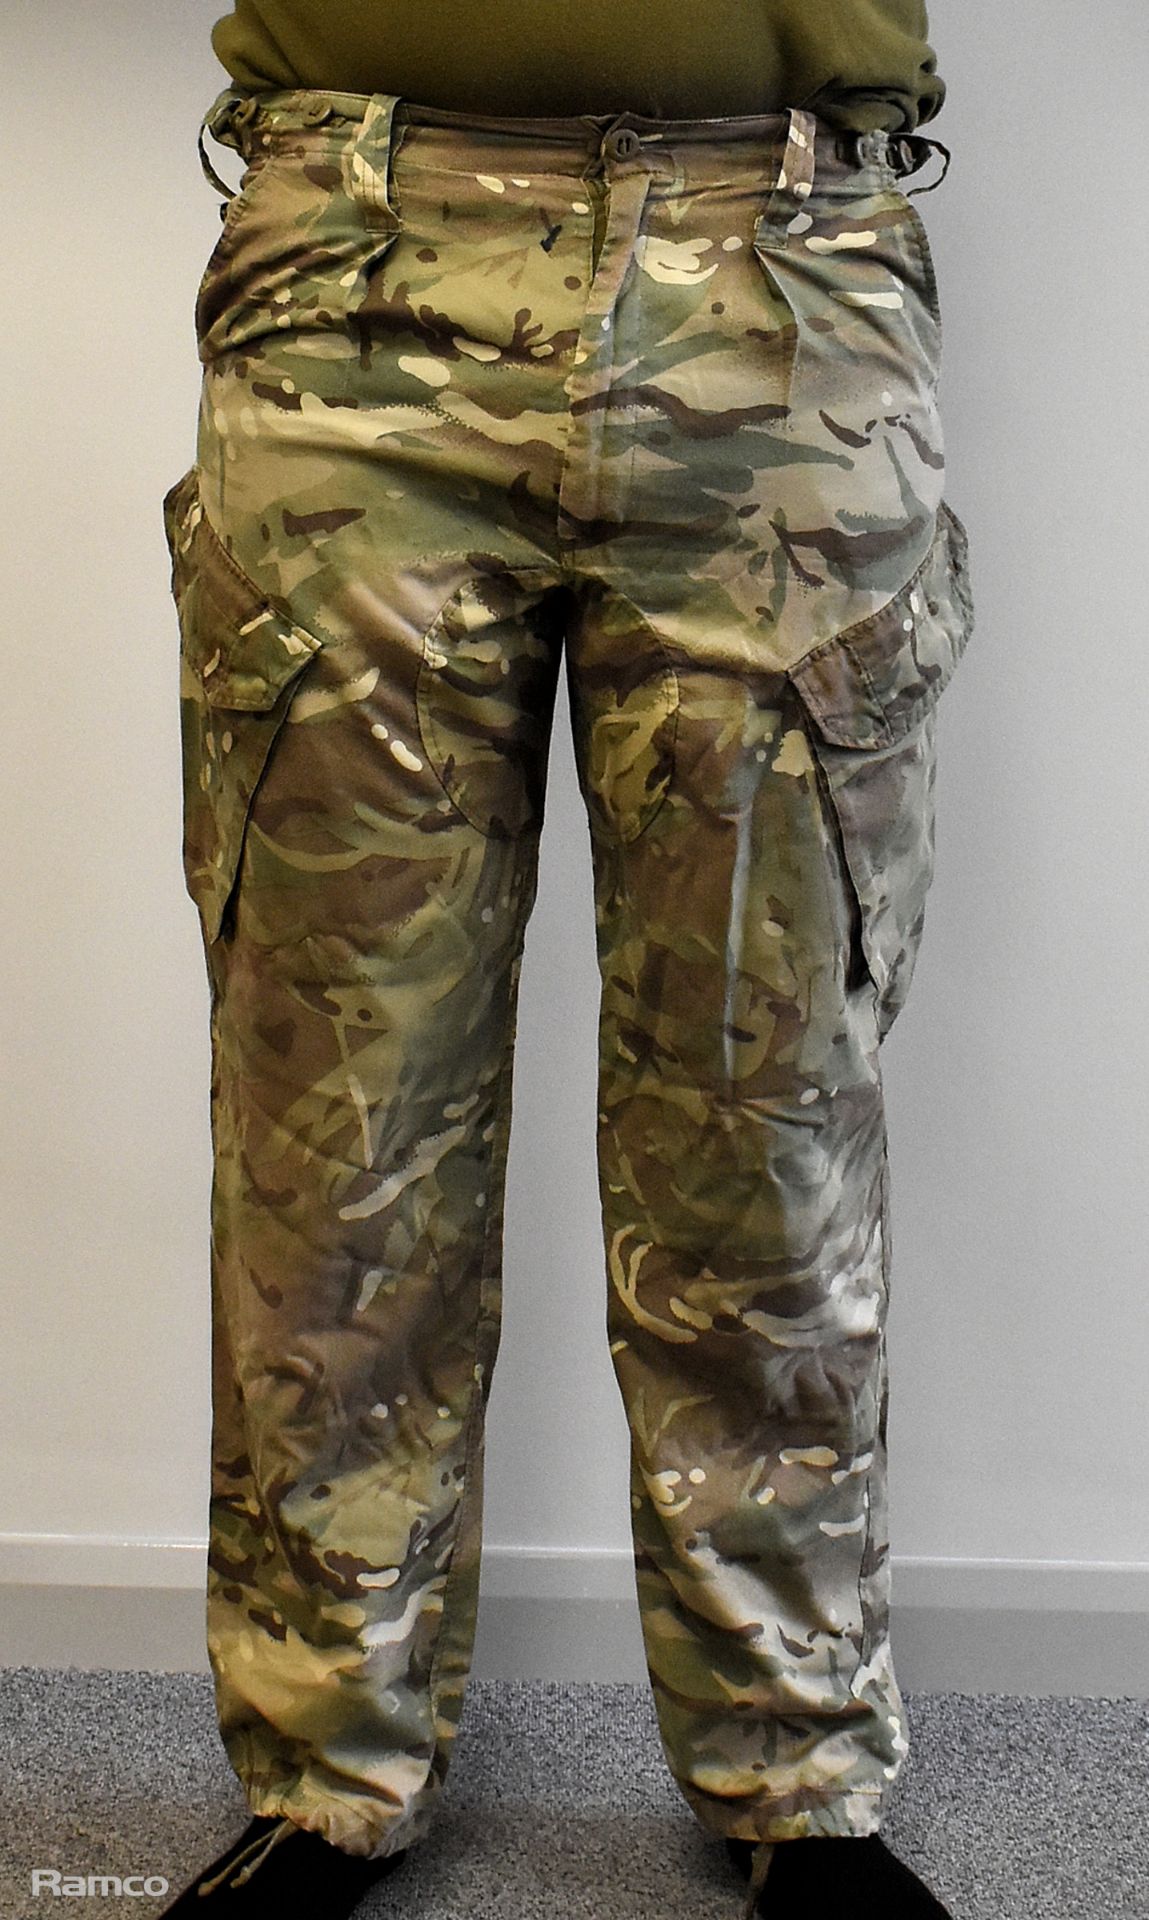 200x British Army MTP combat trousers - mixed grades and sizes